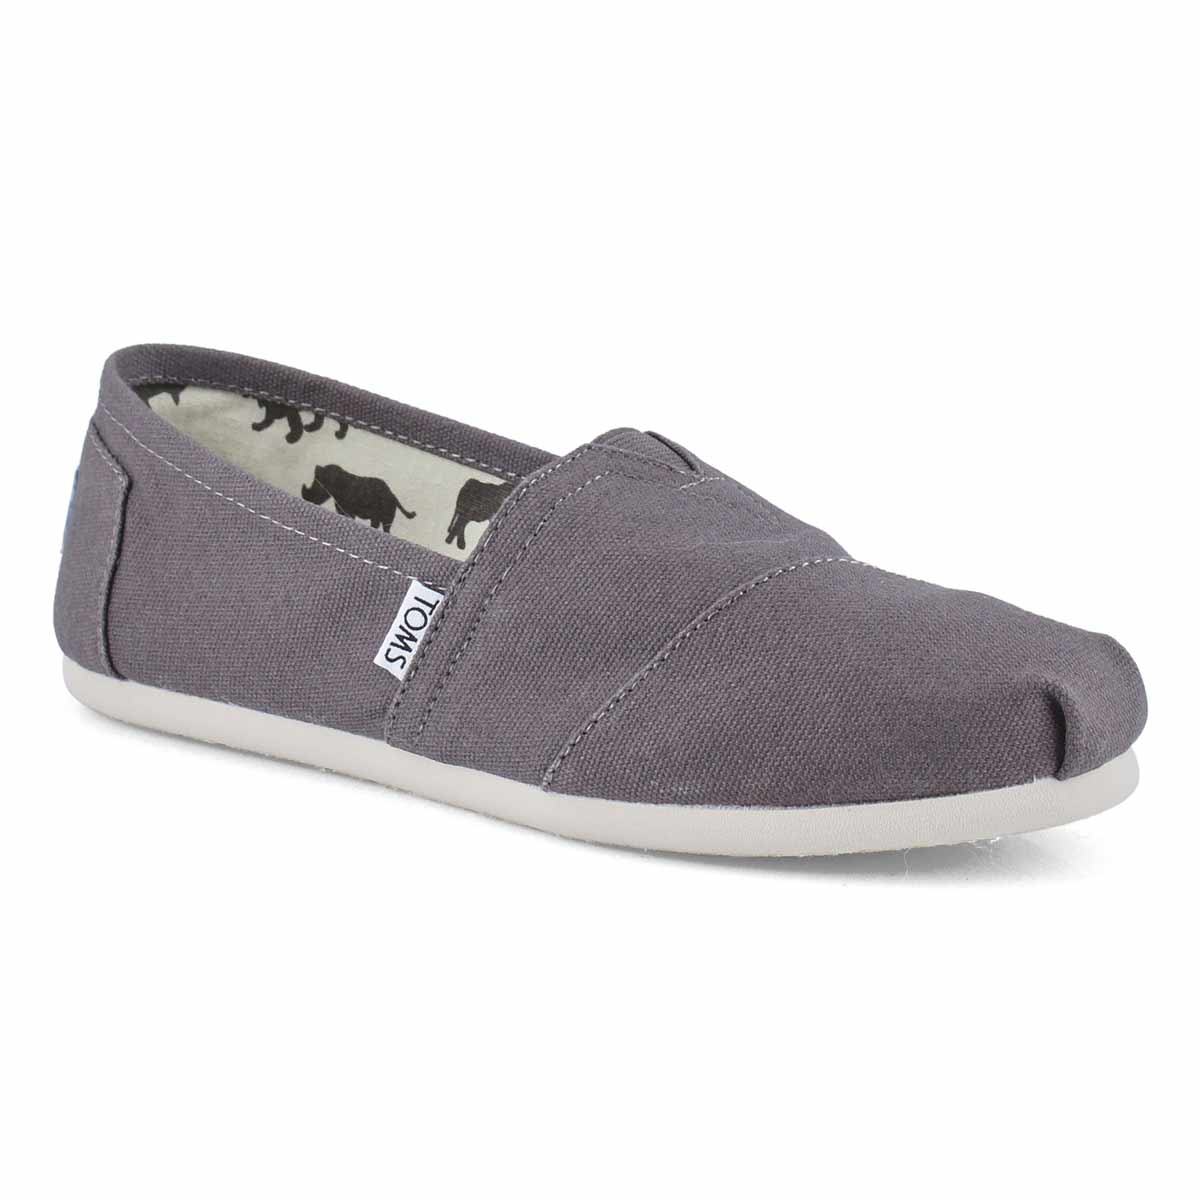 TOMS Women's CLASSIC ash grey canvas loafers